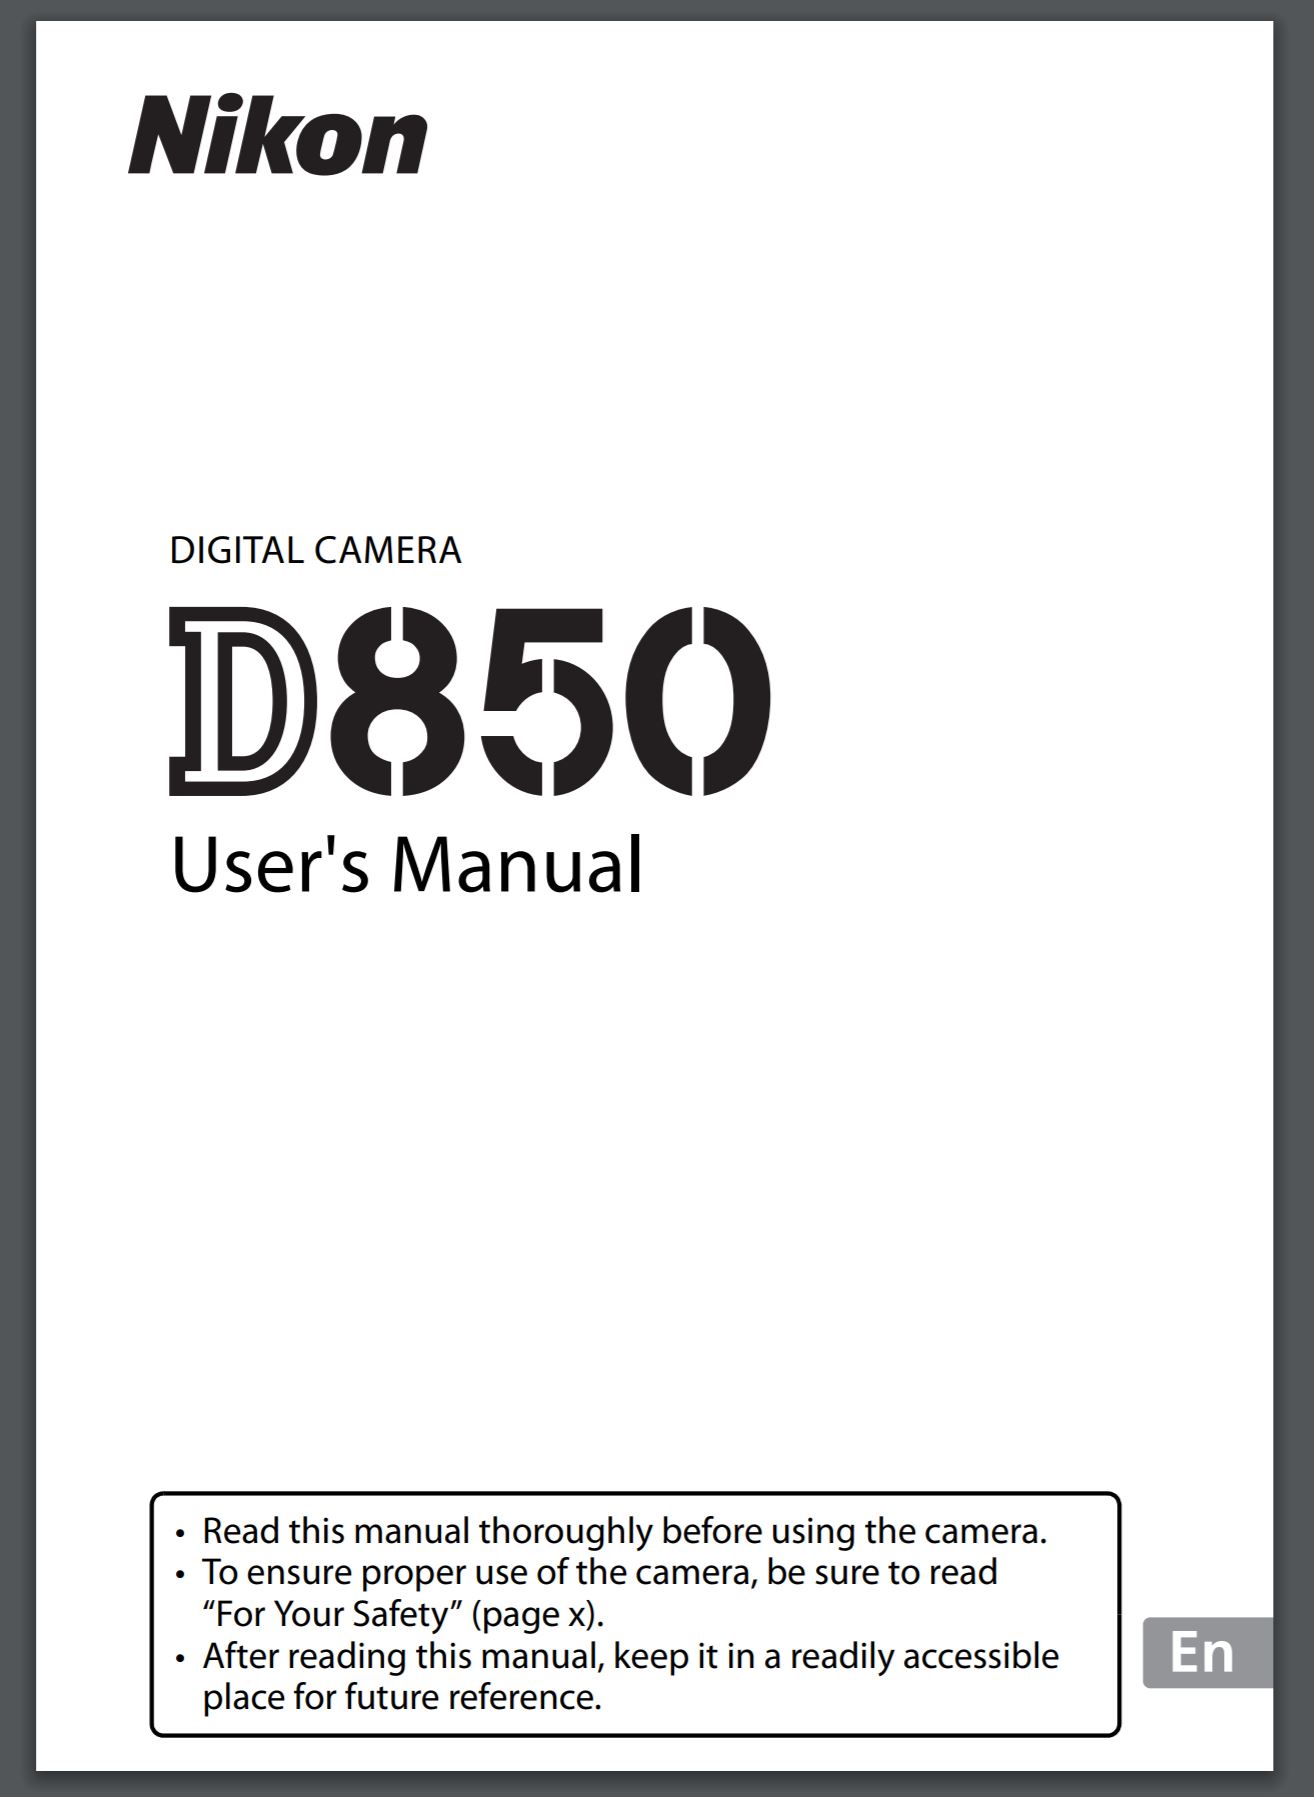 Nikon D850 User’s Manual now Available for Download ! | Camera News at